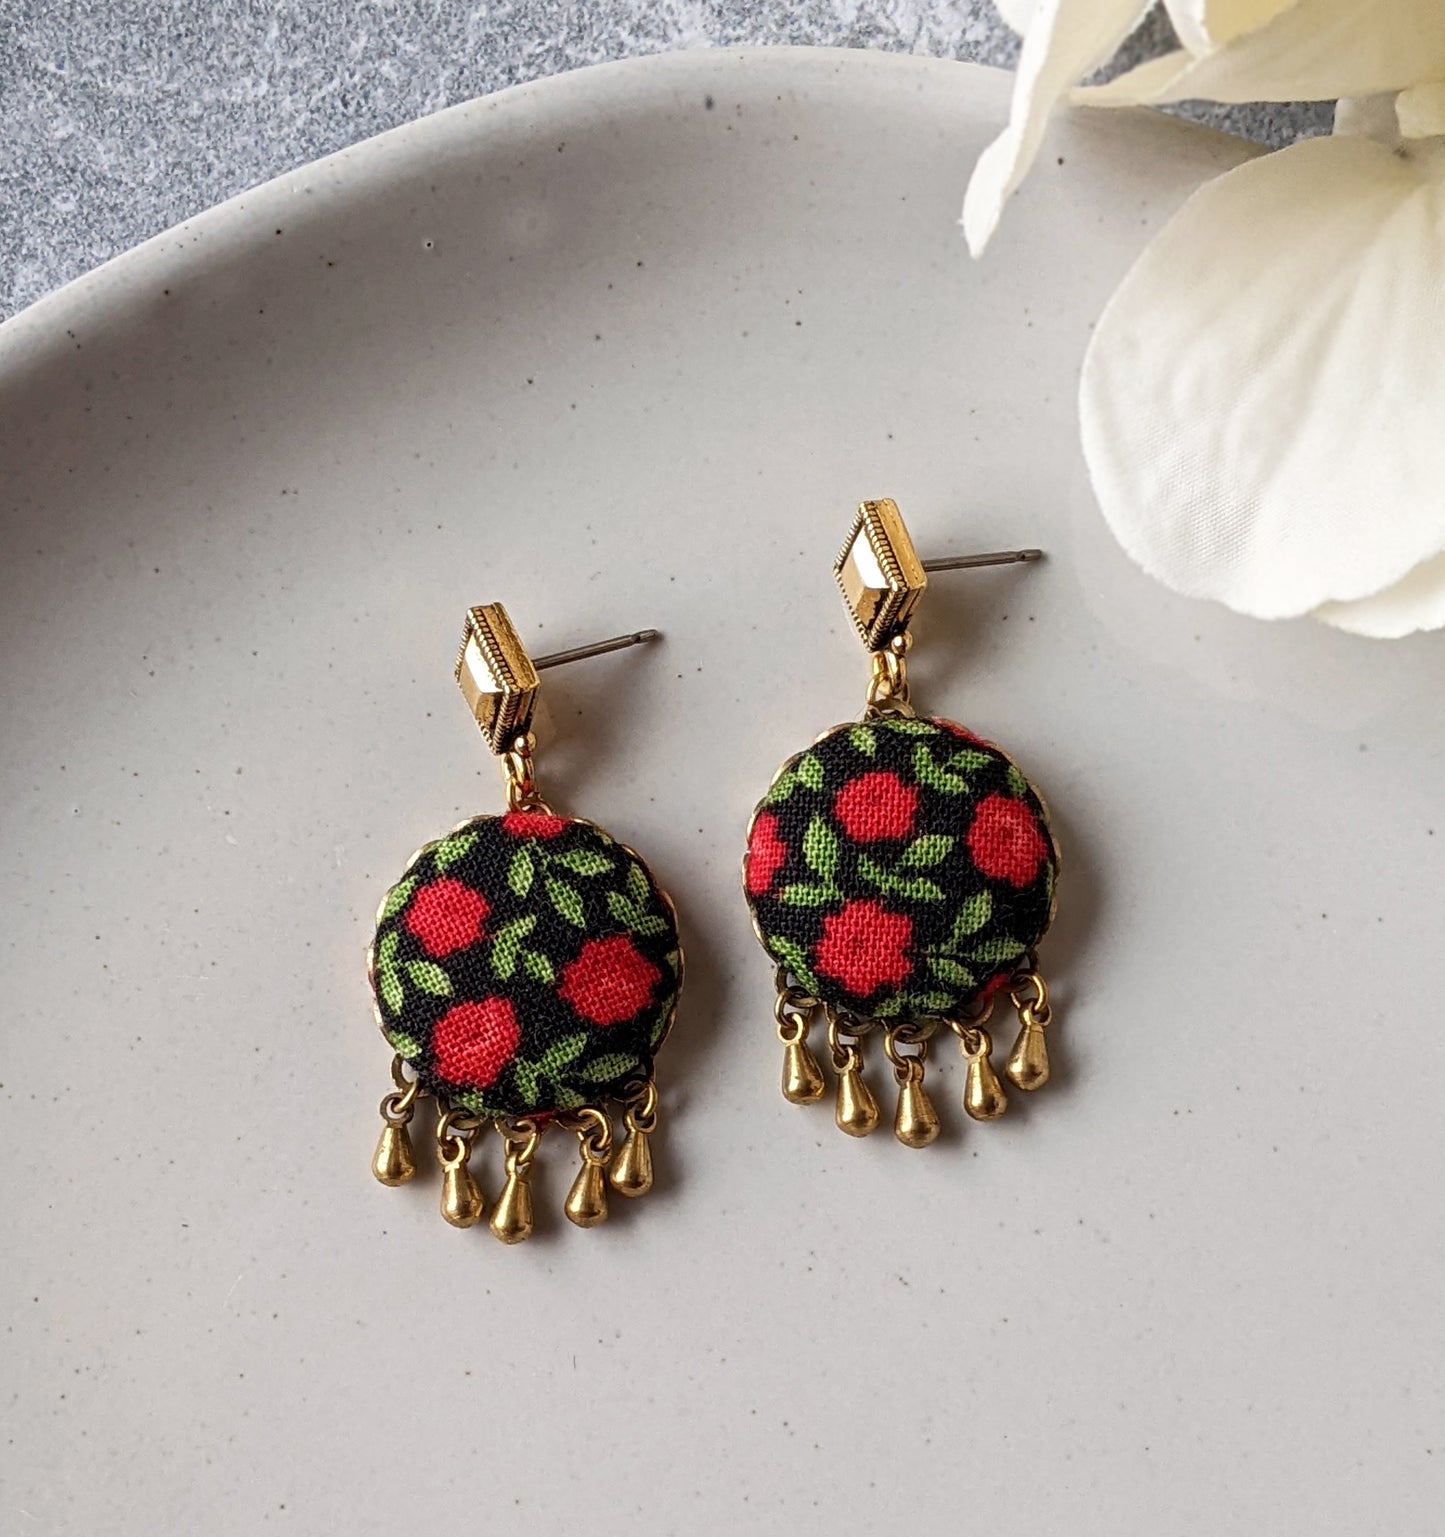 Red Rose Earrings With Brass Drops, Floral Fabric Nature Jewelry, Cottagecore Earrings, Green Leaves